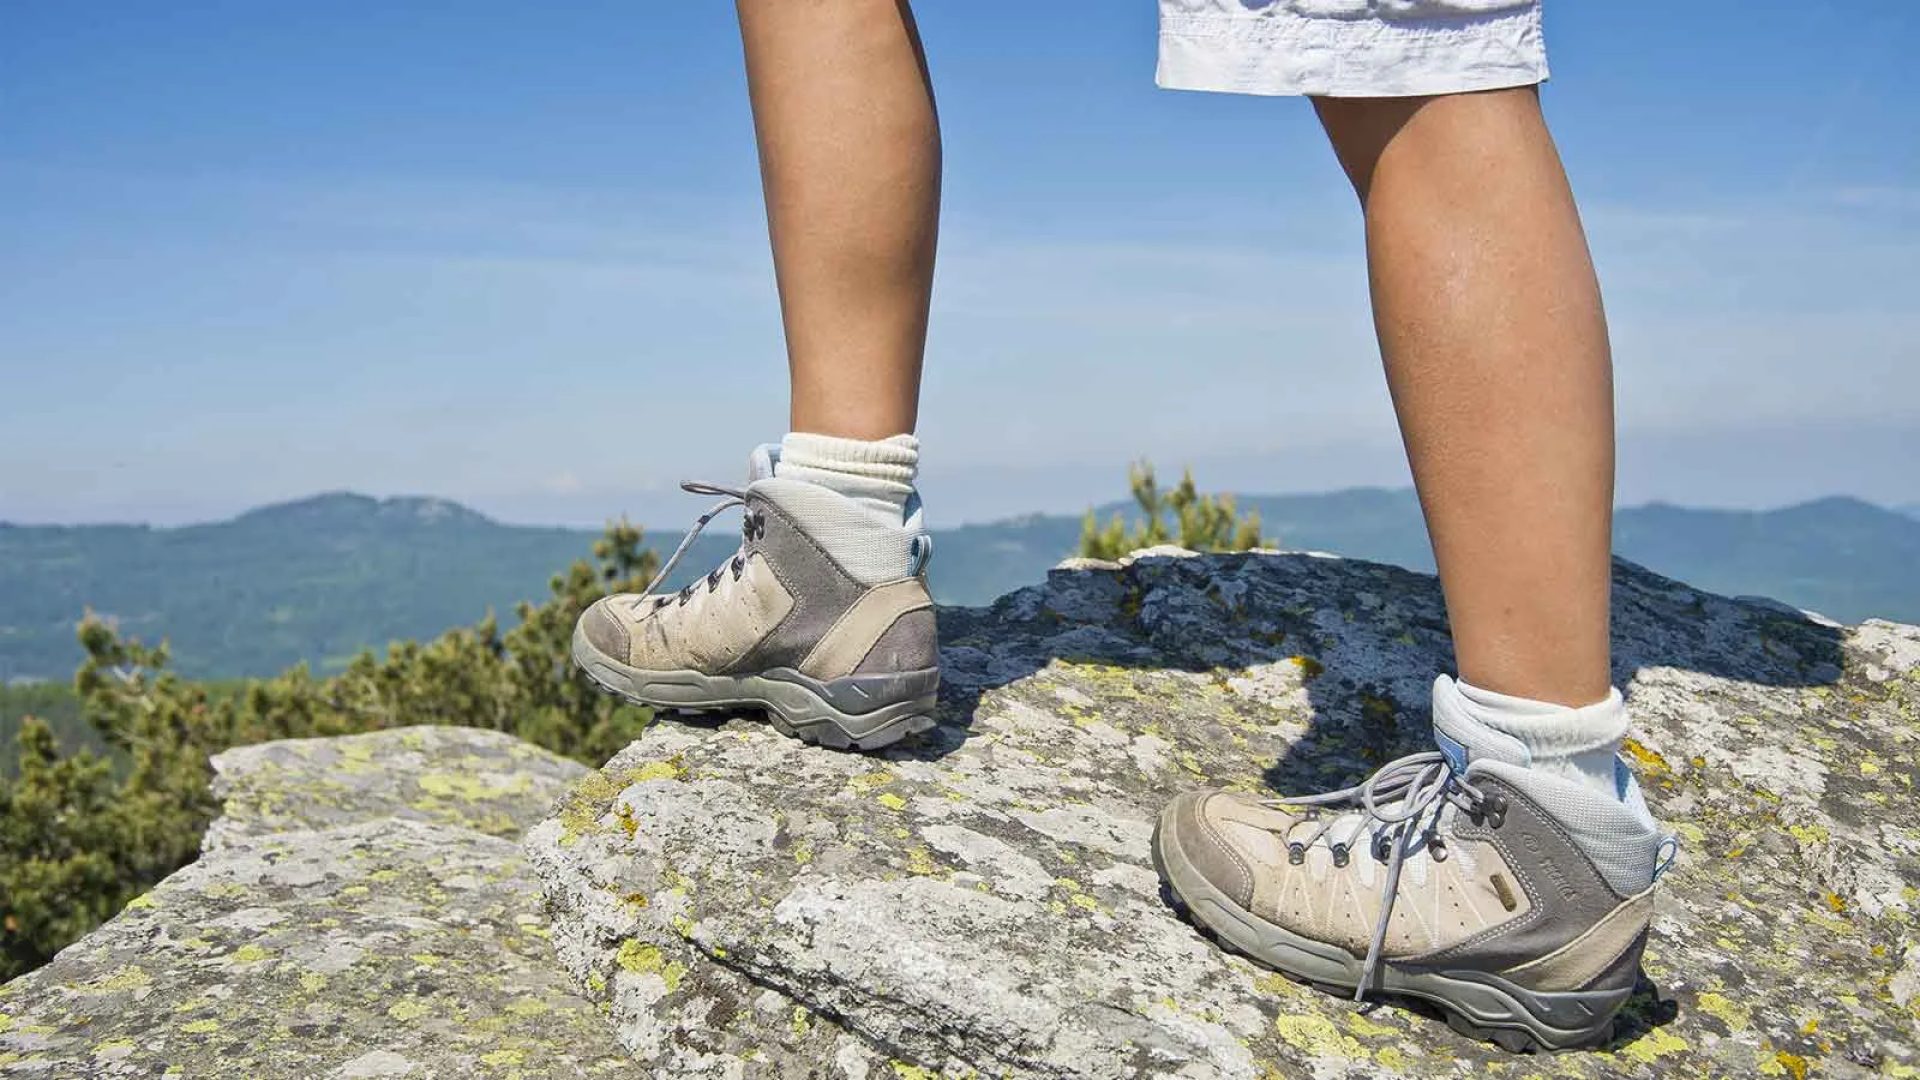 Legs of hikers on a rock with a view of the Haute-Loire mountains, Auvergne